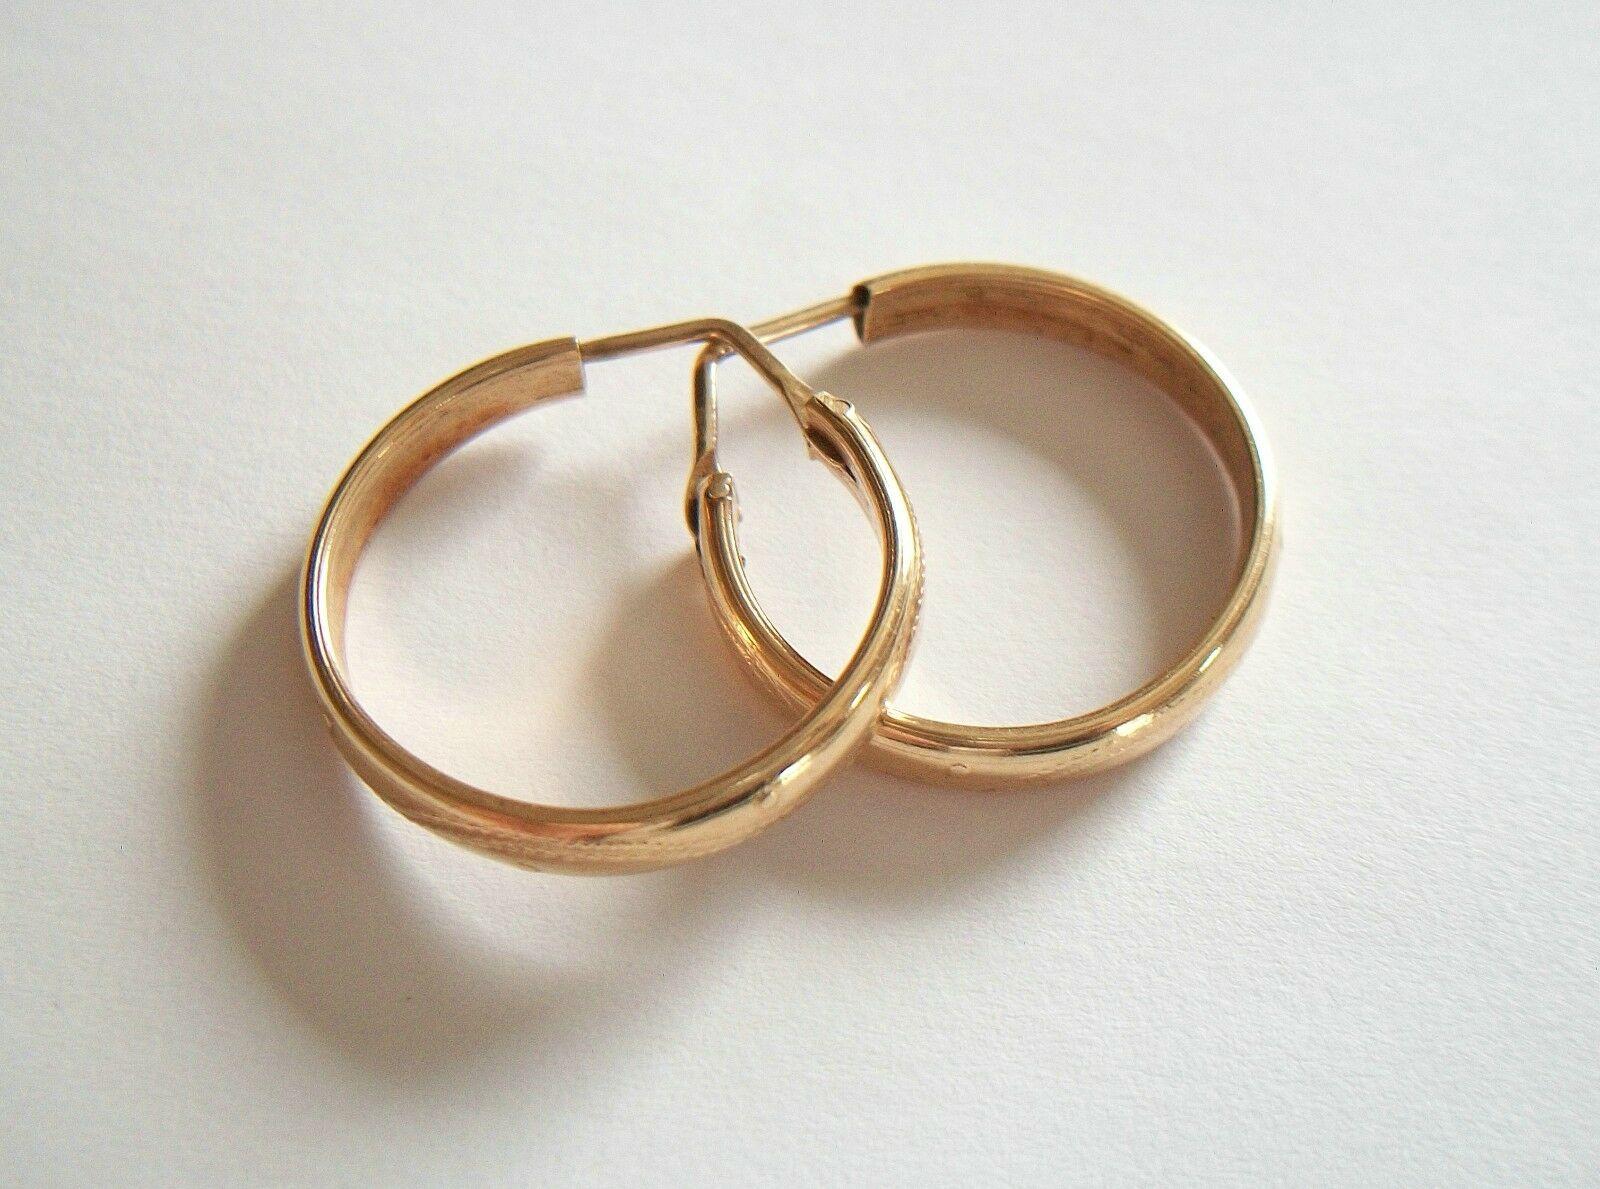 Women's or Men's Vintage Vicenza 14K Gold Hoop Earrings, Hand Made, Italy, Mid 20th Century For Sale